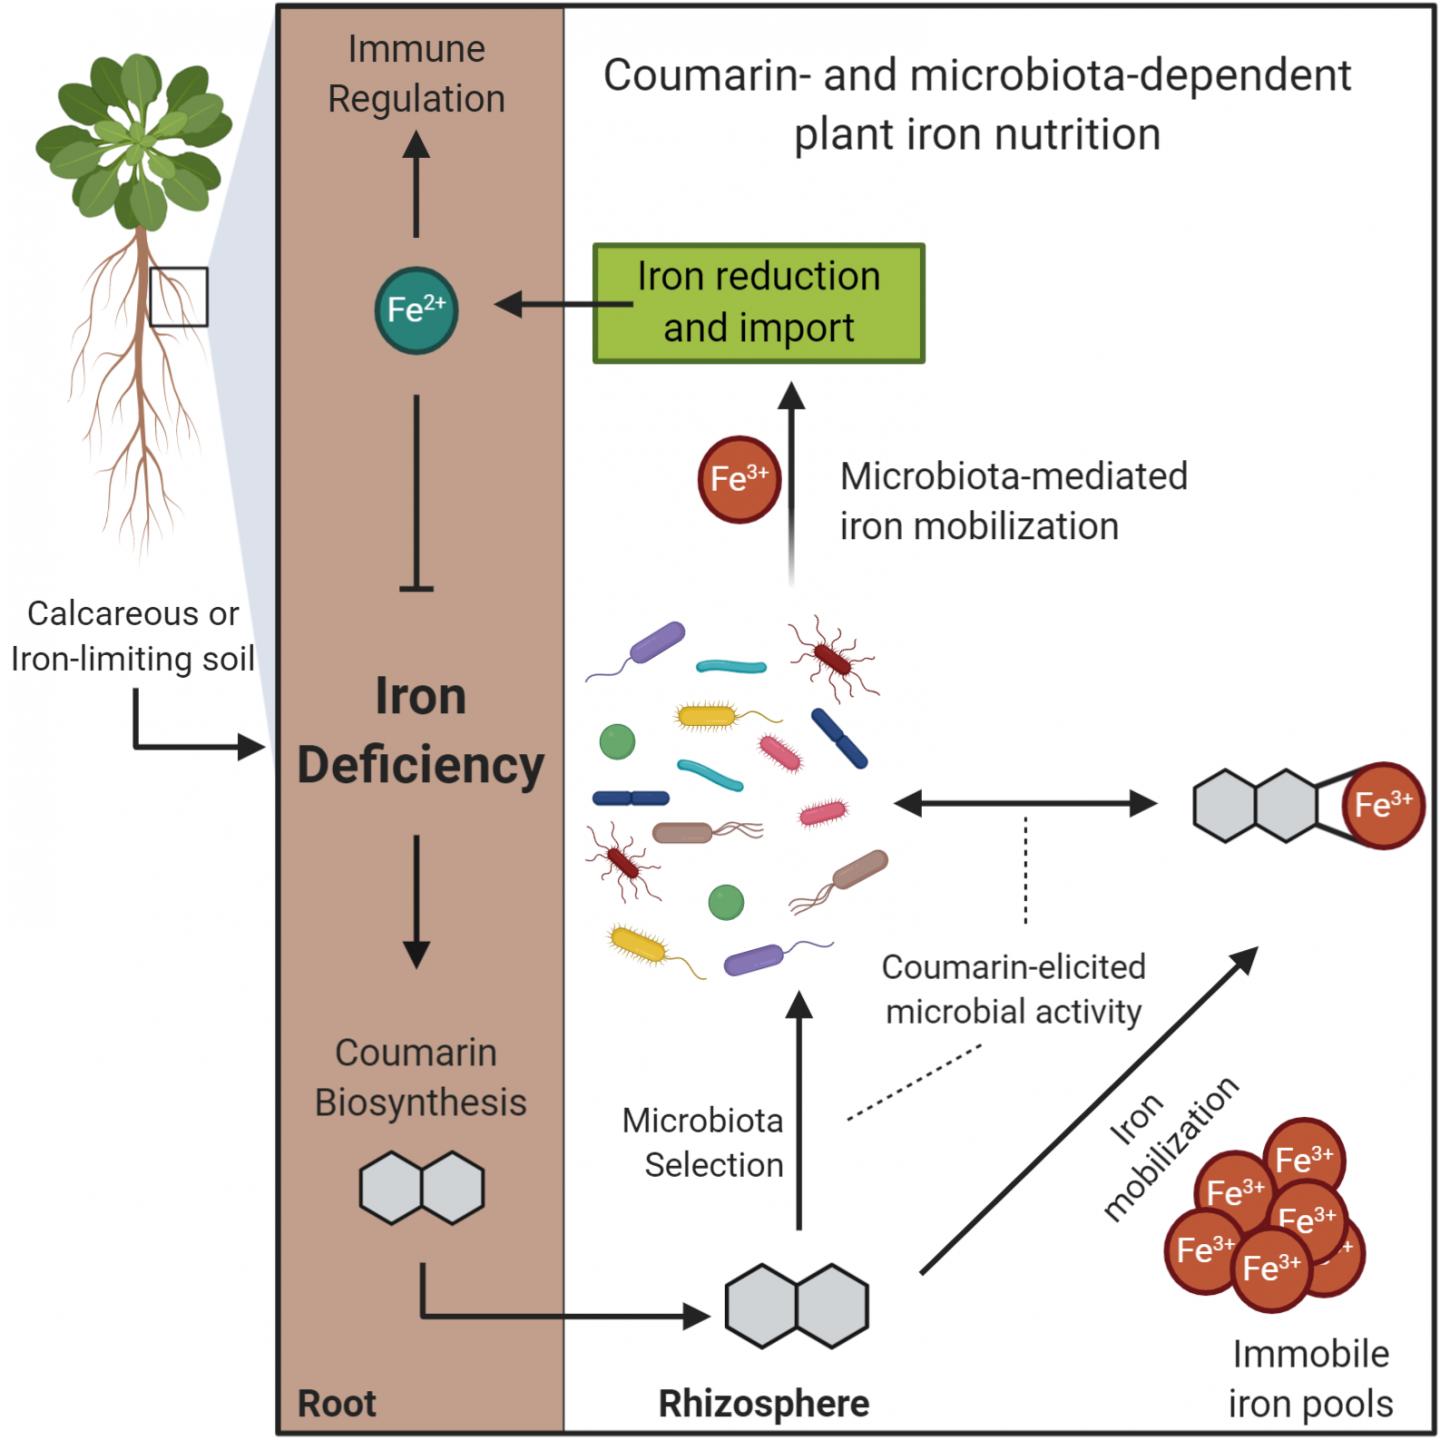 Illustration of coumarin- and microbiota-dependent plant iron nutrition